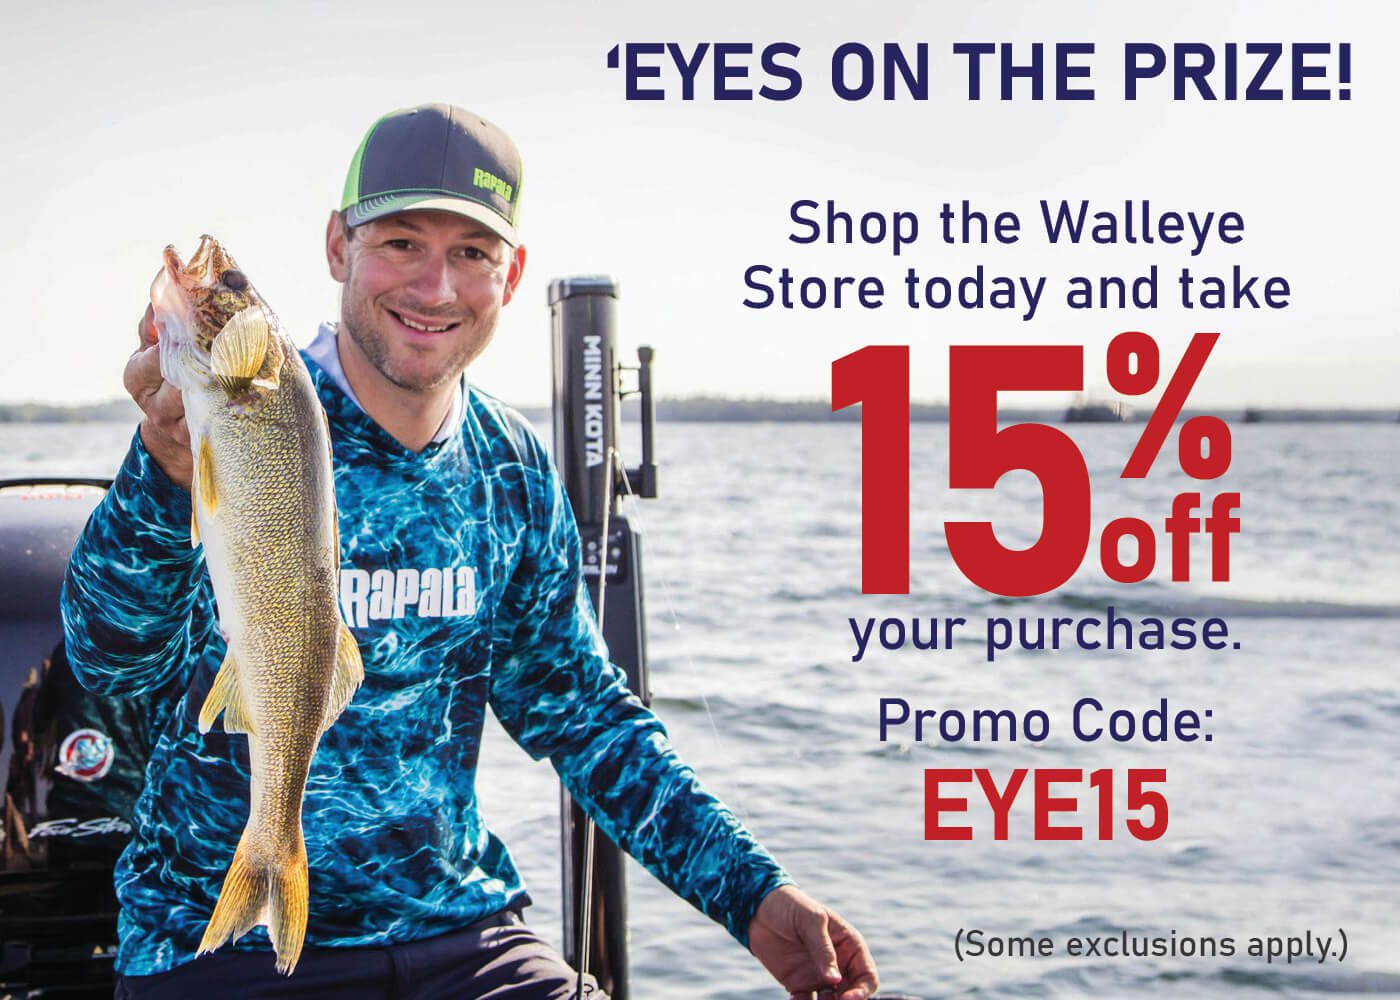 Shop the Walleye Store today and take 15% off your purchase.